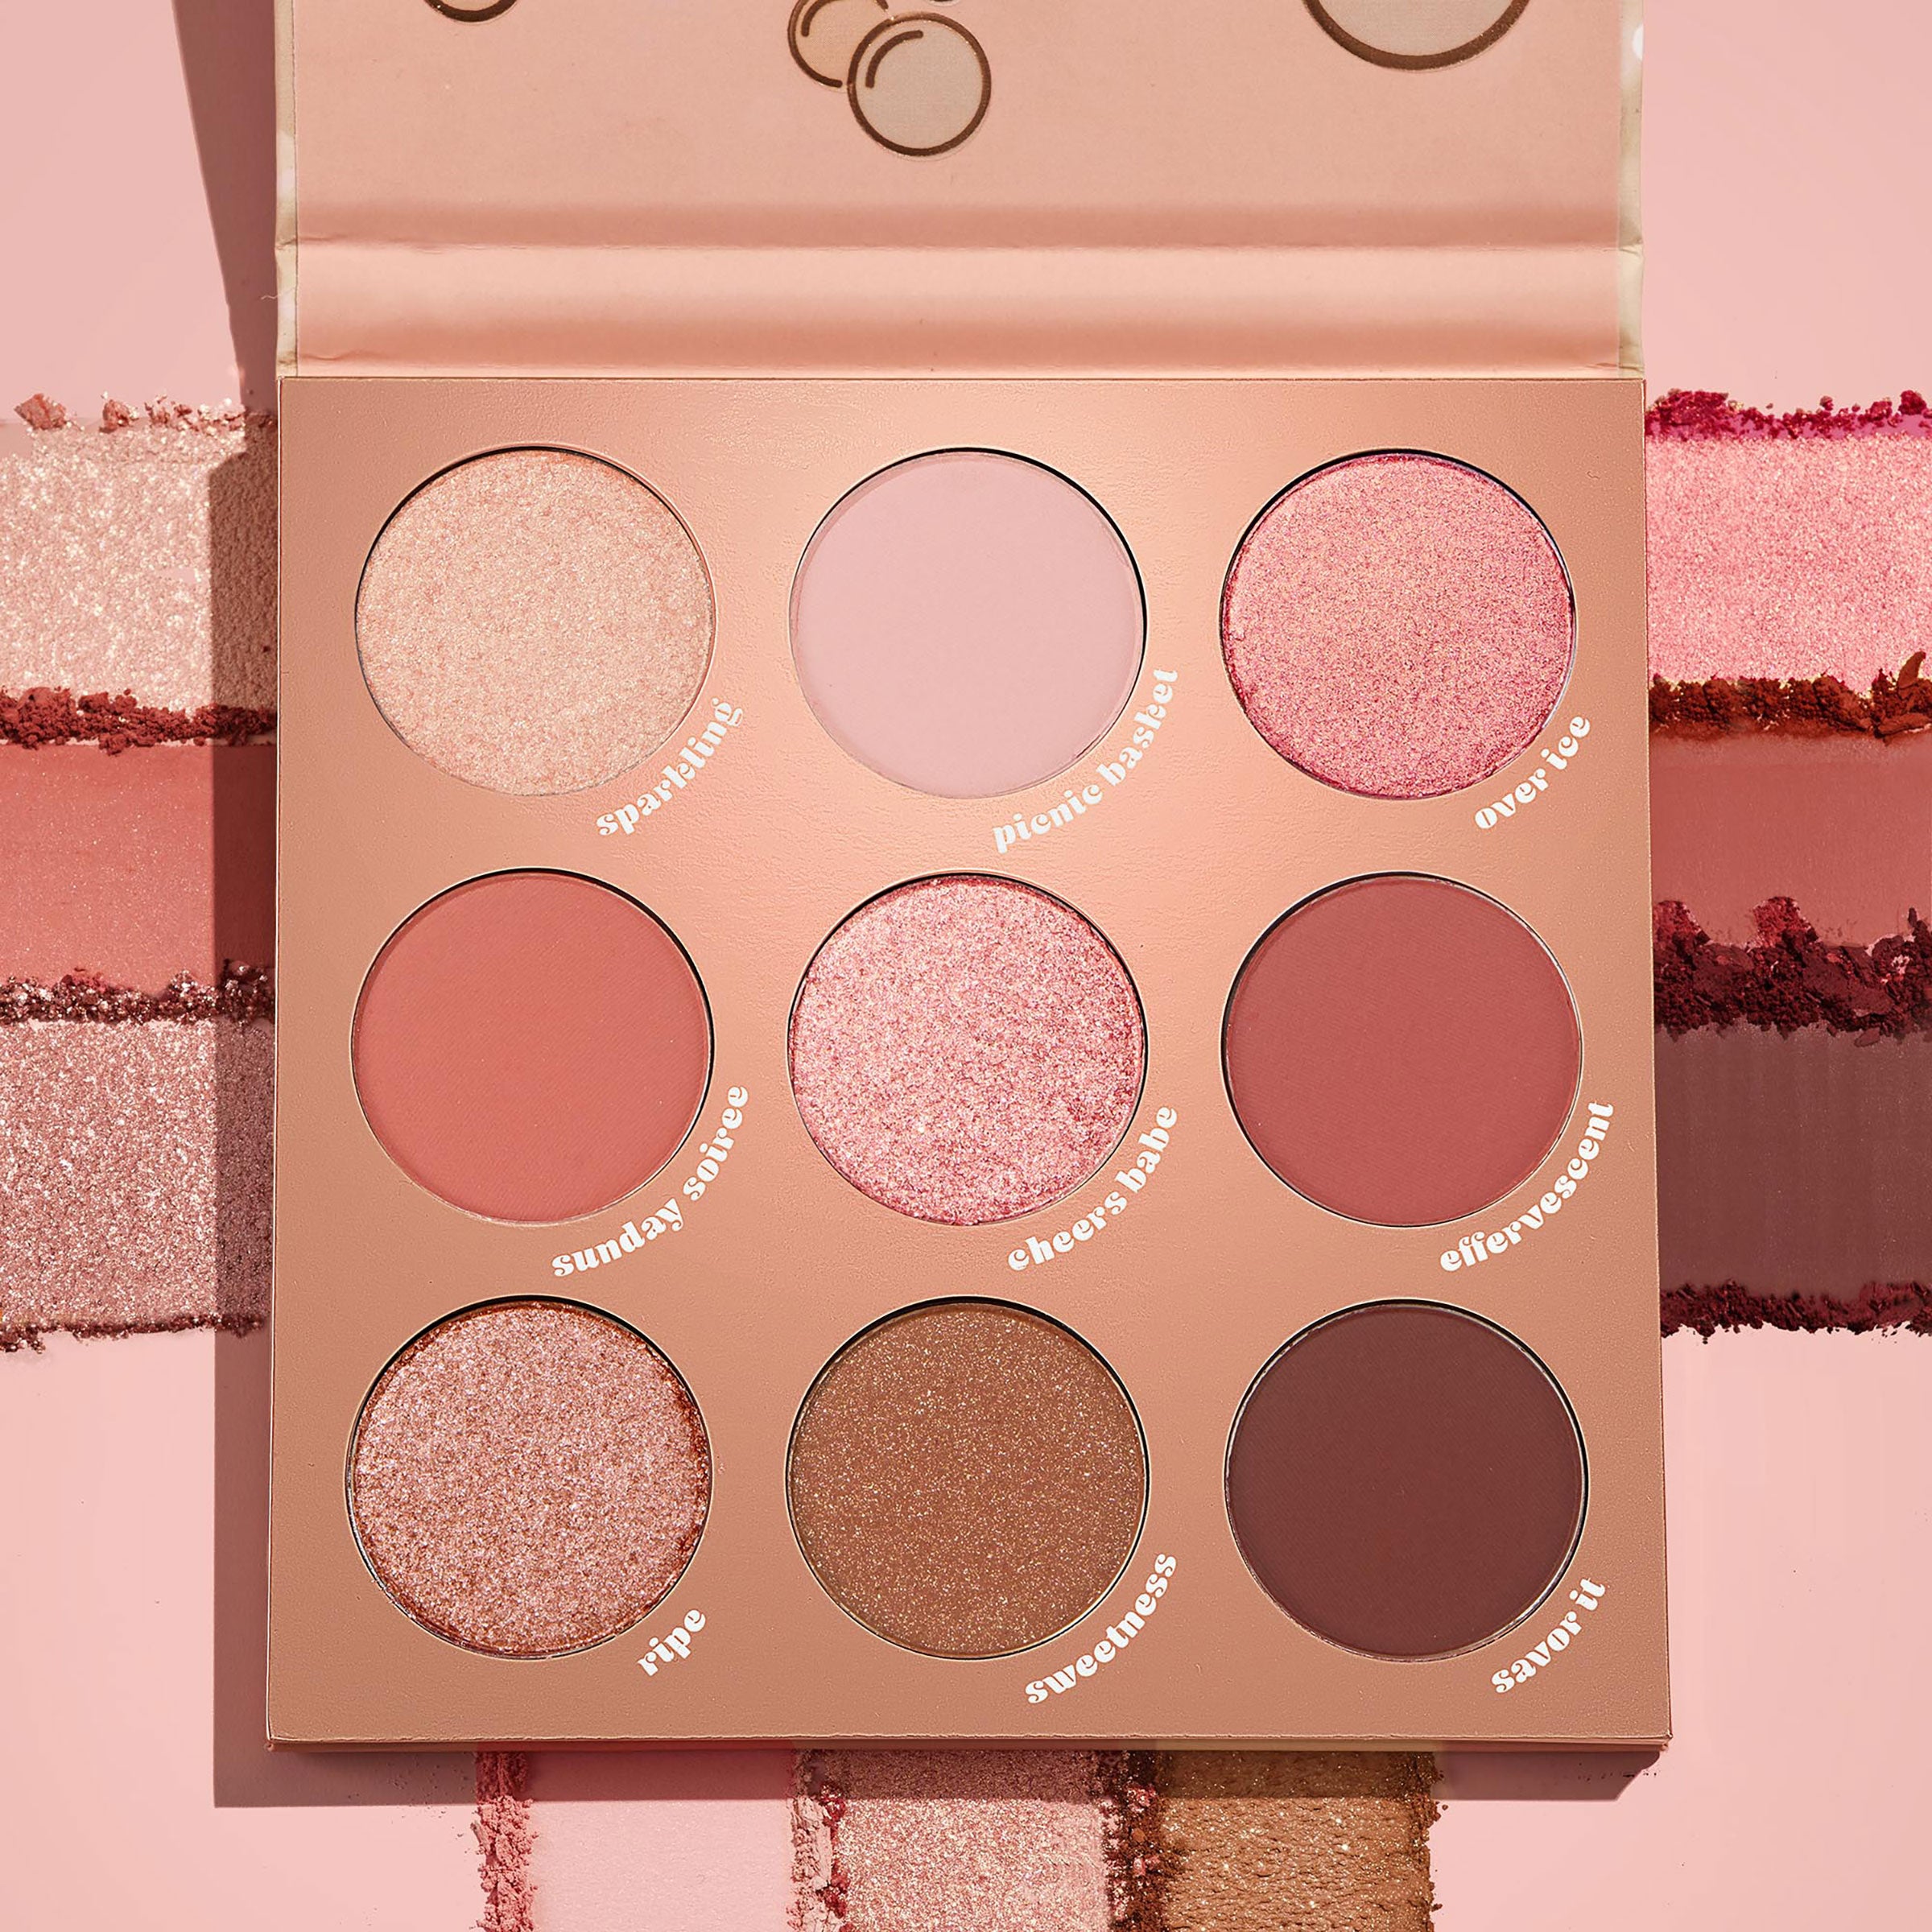 ColourPop By the Rose Eyeshadow Palette Review & Swatches